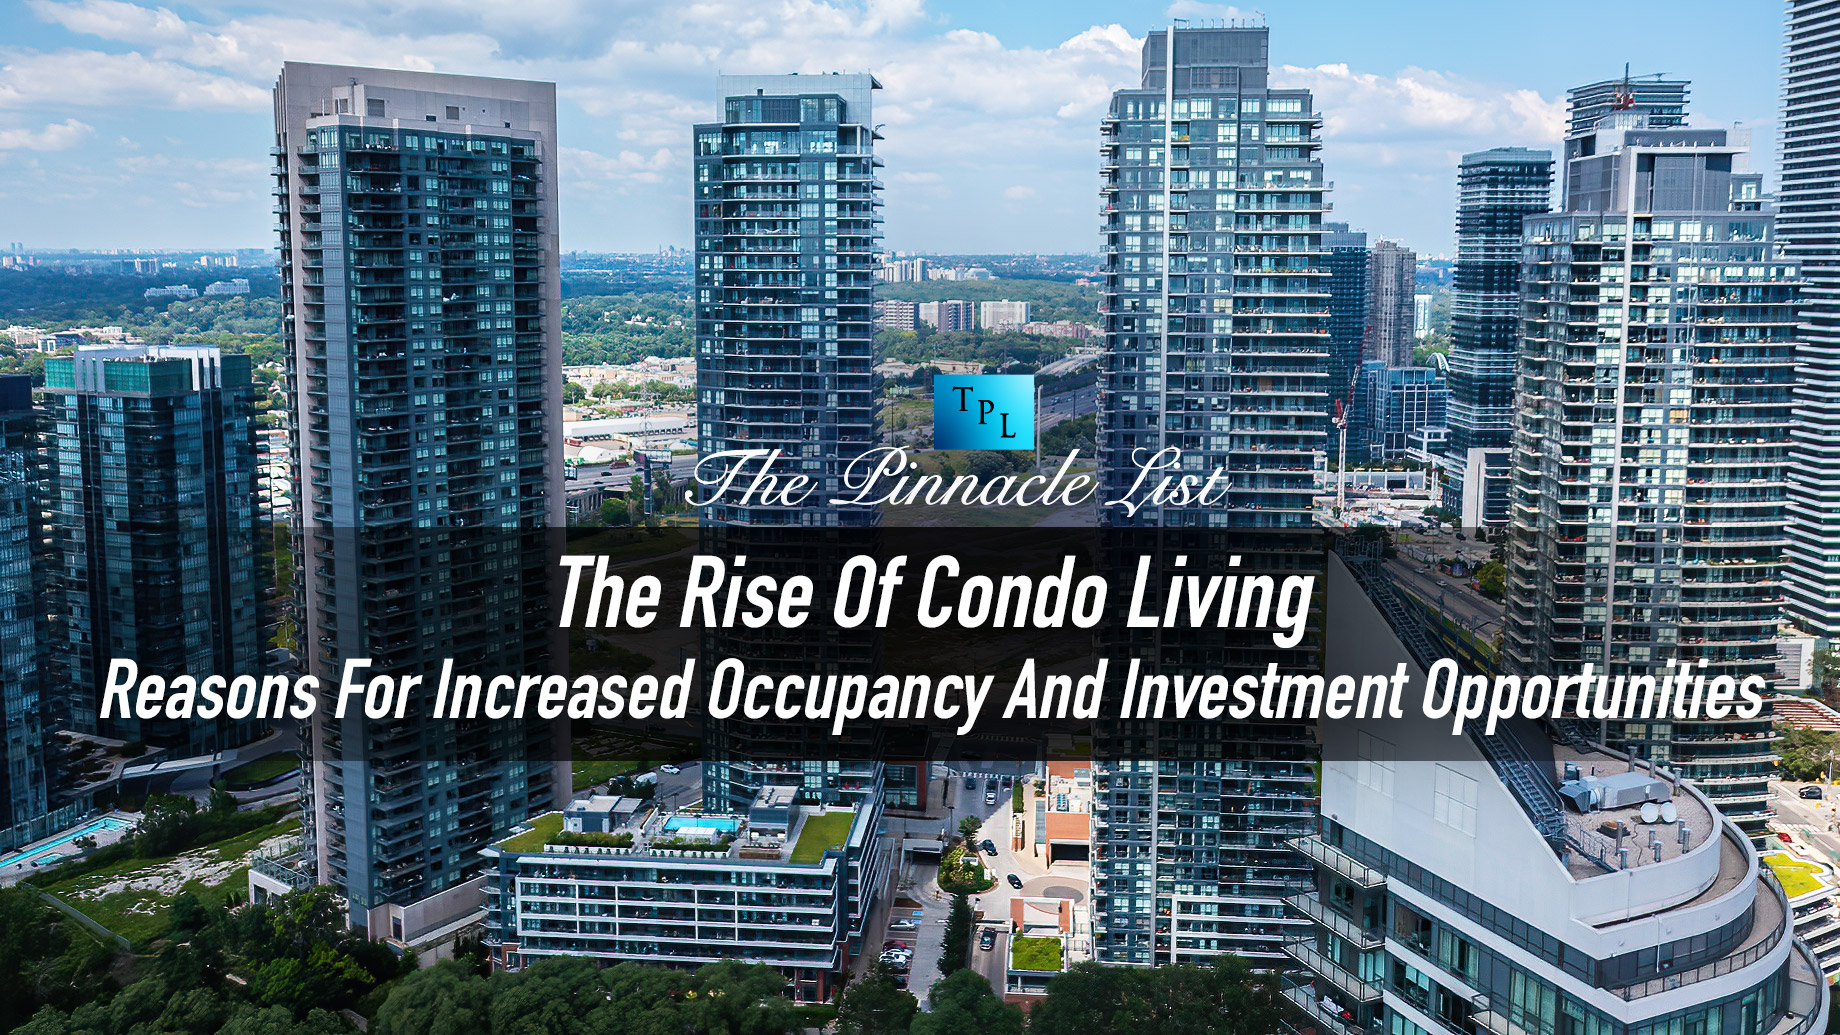 The Rise Of Condo Living: Reasons For Increased Occupancy And Investment Opportunities